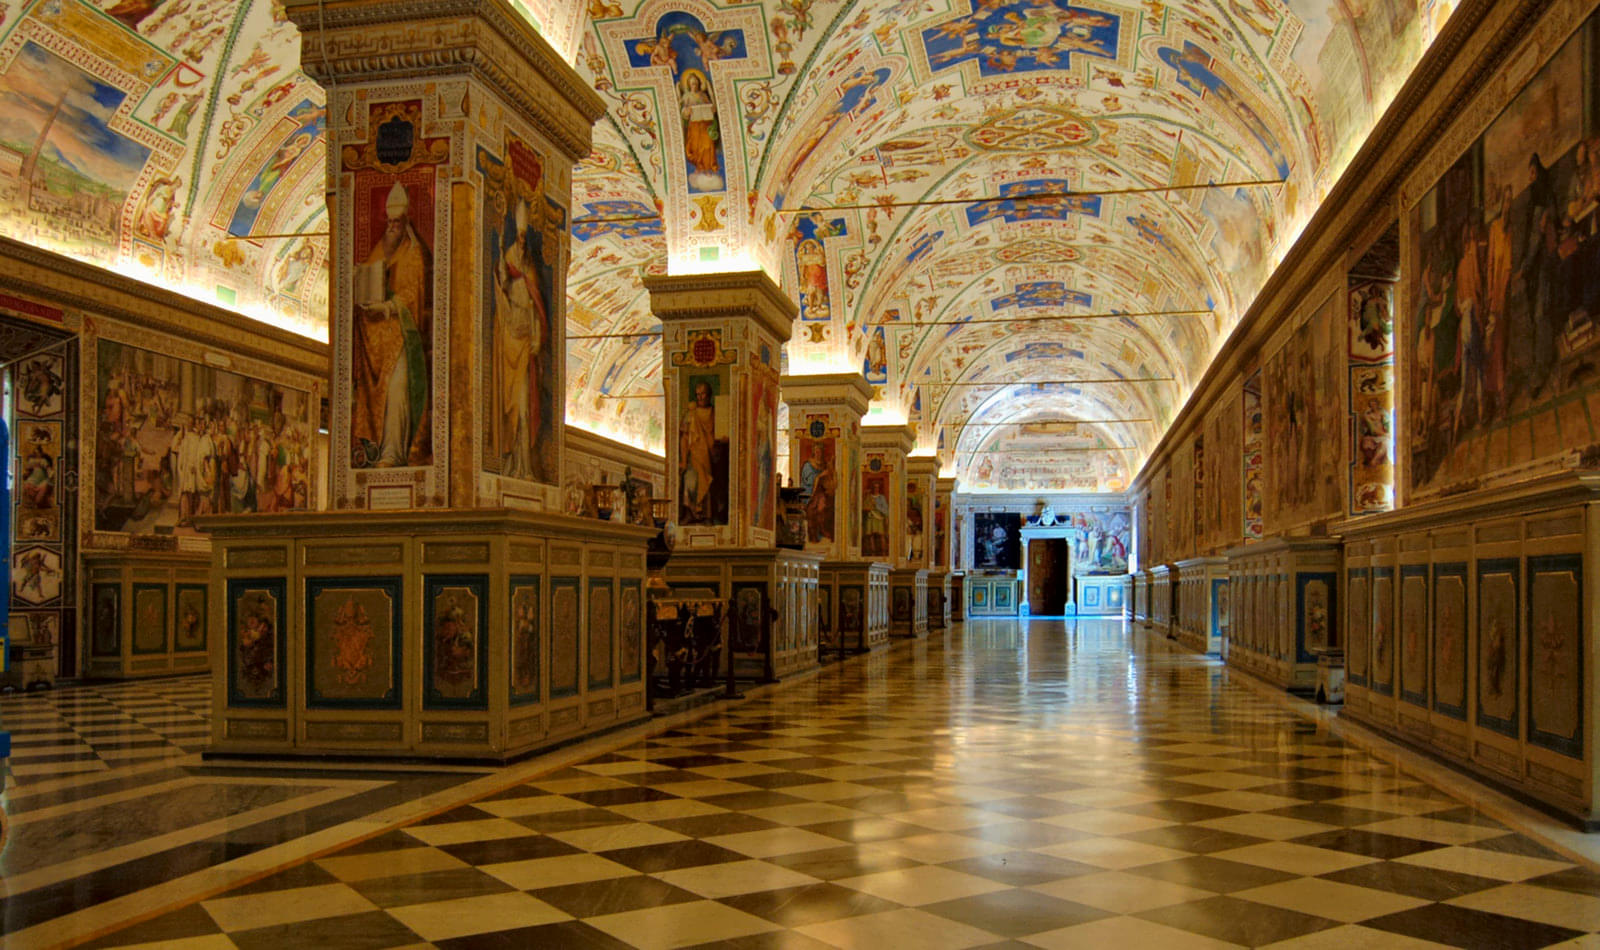 Vatican Apostolic Library Overview